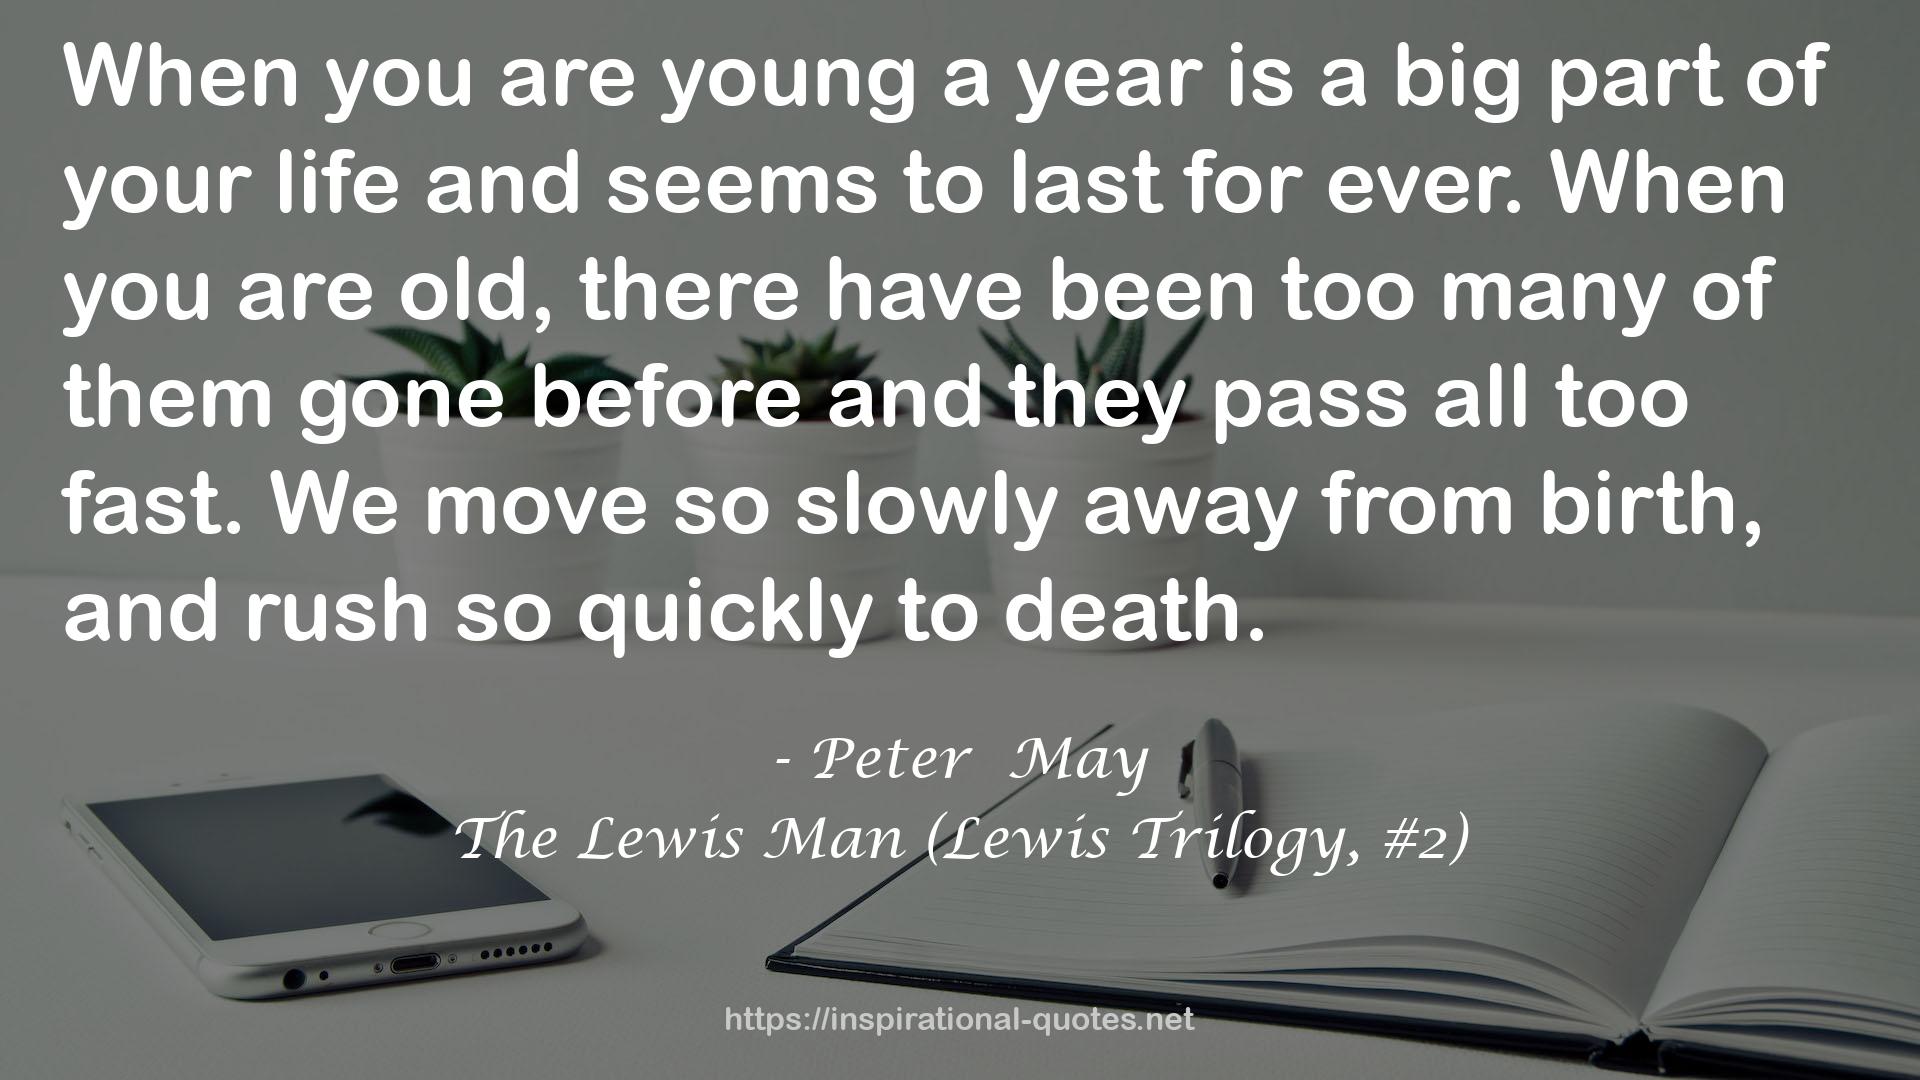 The Lewis Man (Lewis Trilogy, #2) QUOTES